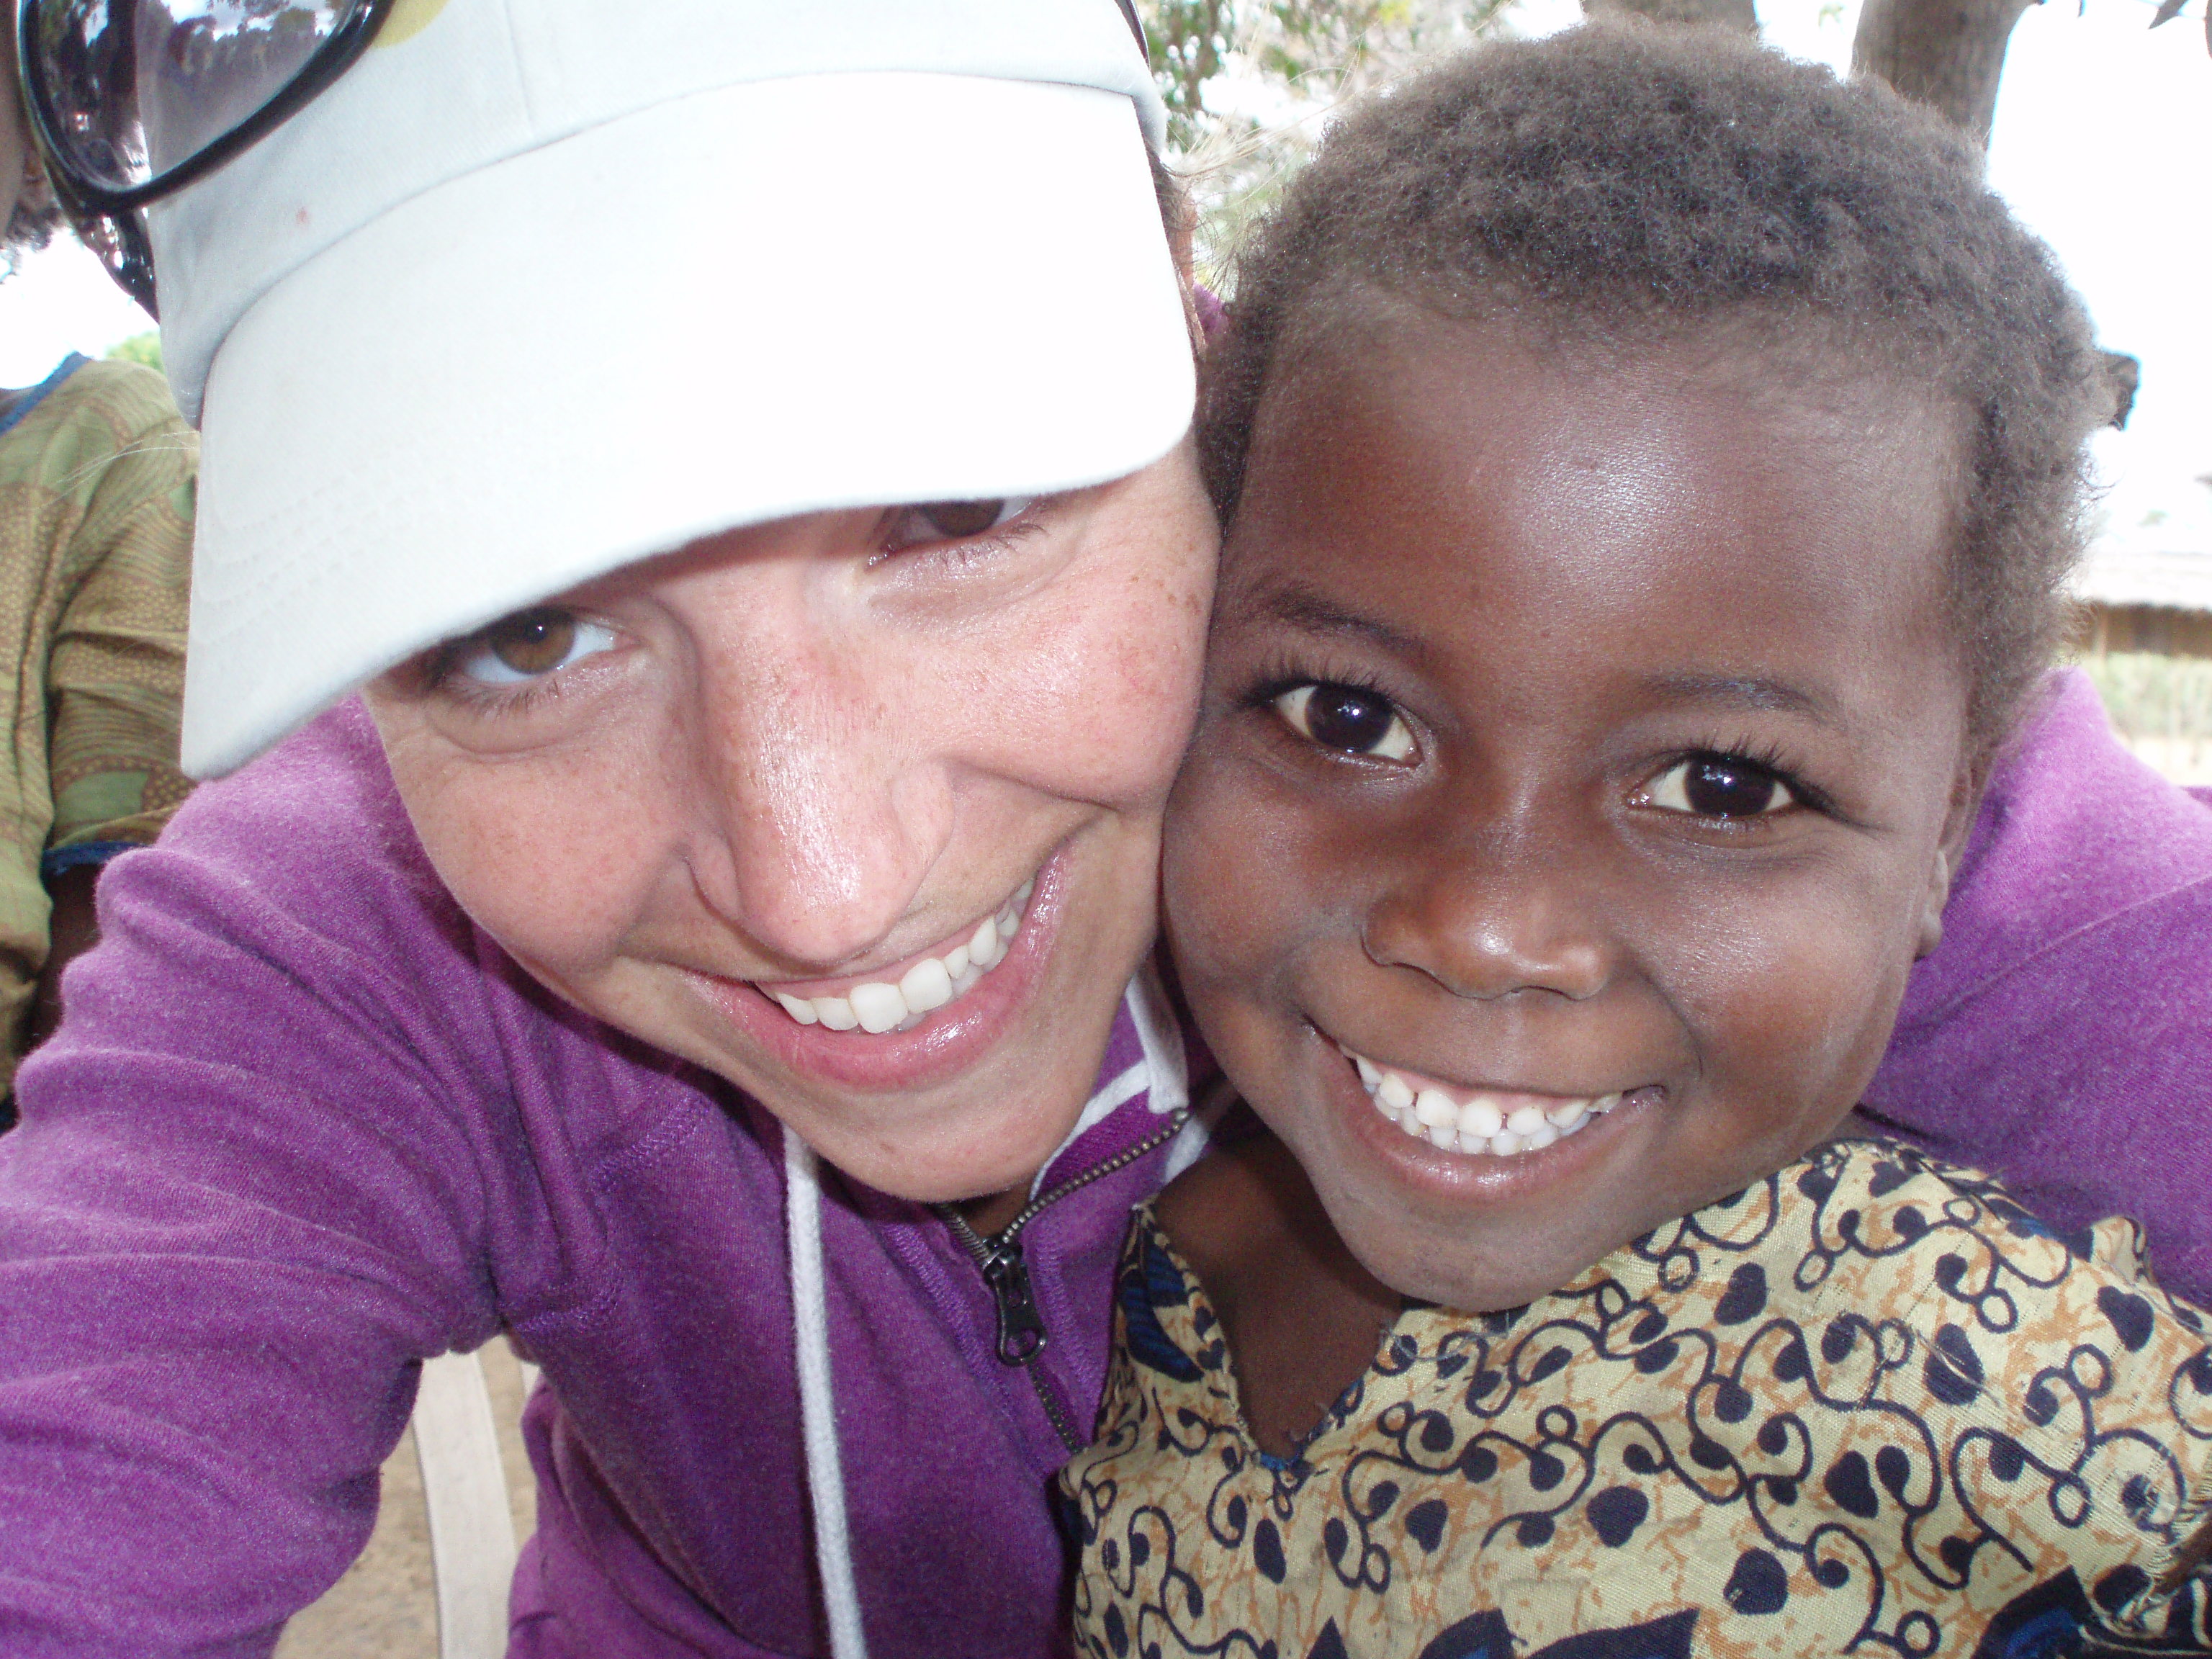 Volunteer In Africa - With Change In Mind -With Change In Mind